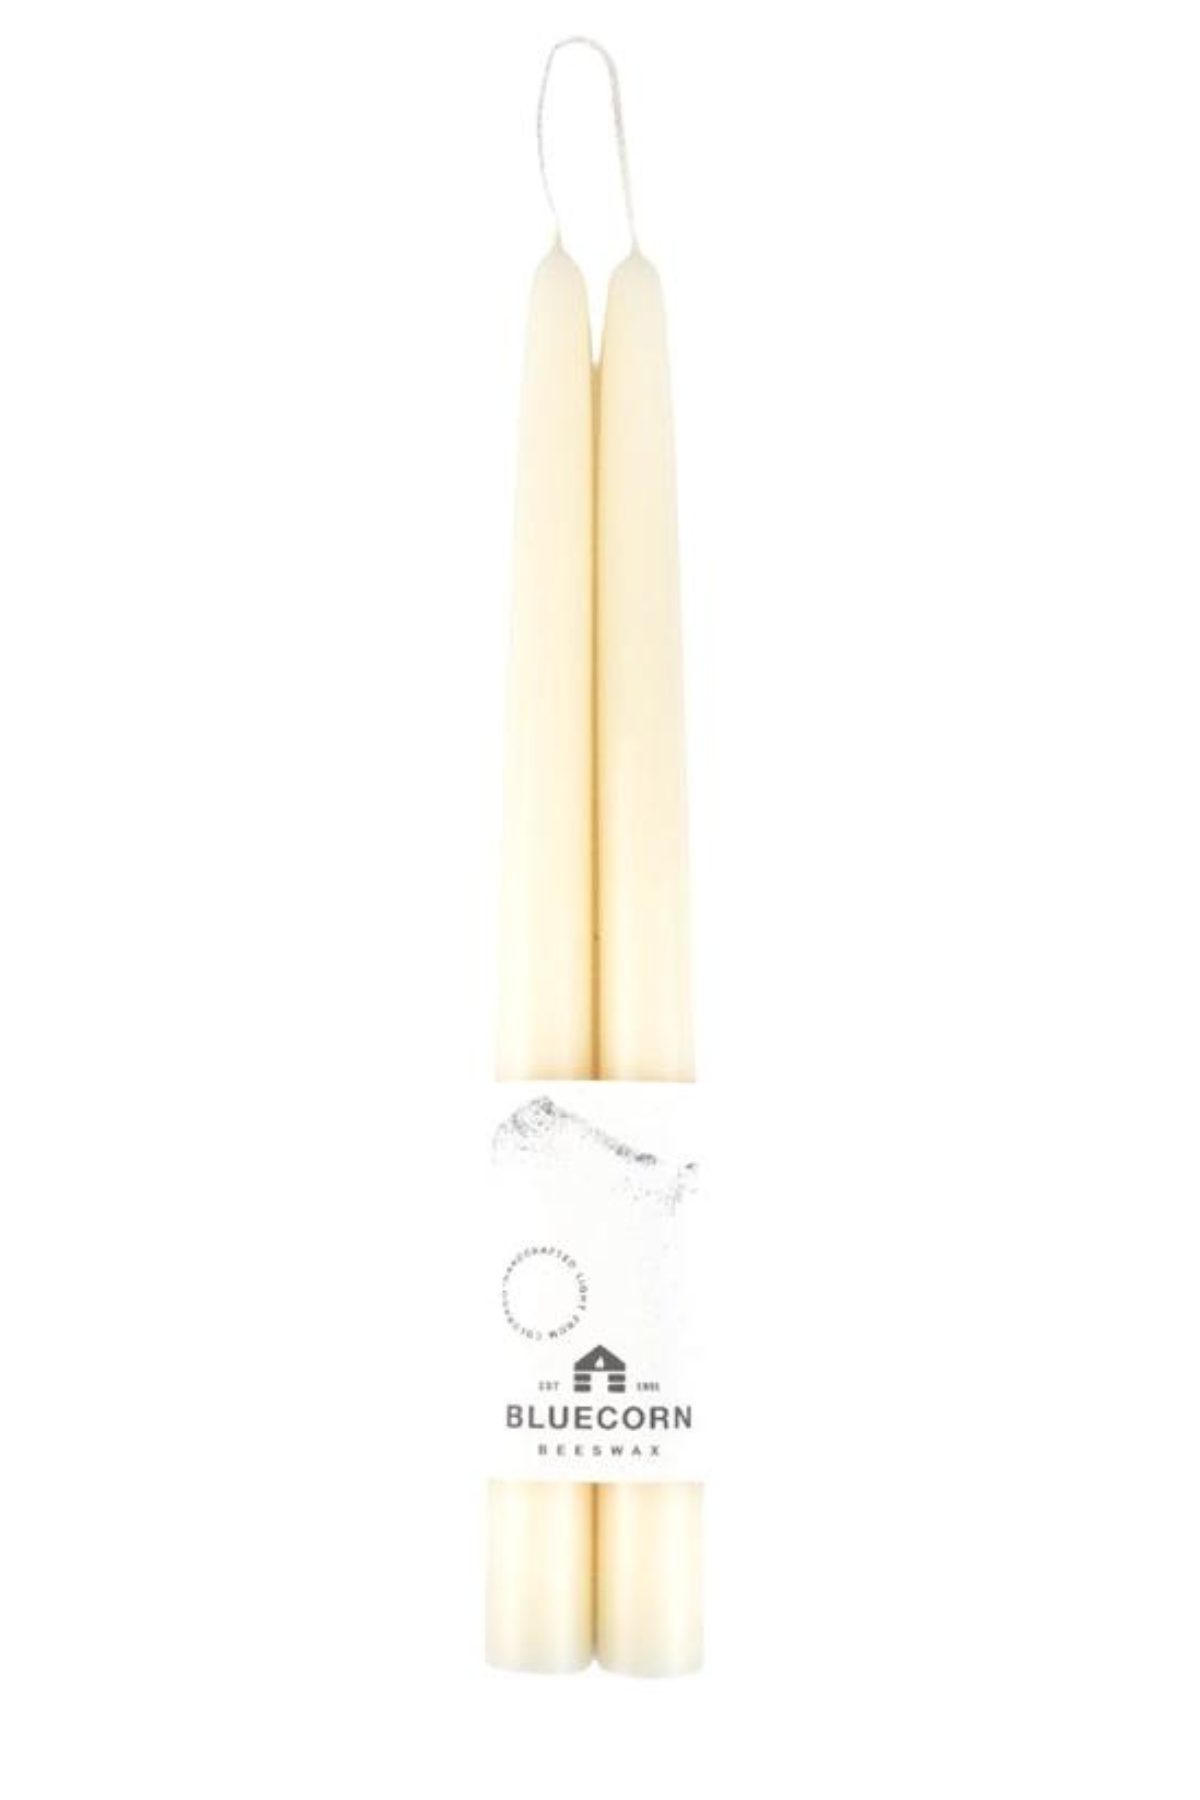 Bluecorn Candles Beeswax Taper Candle Pair